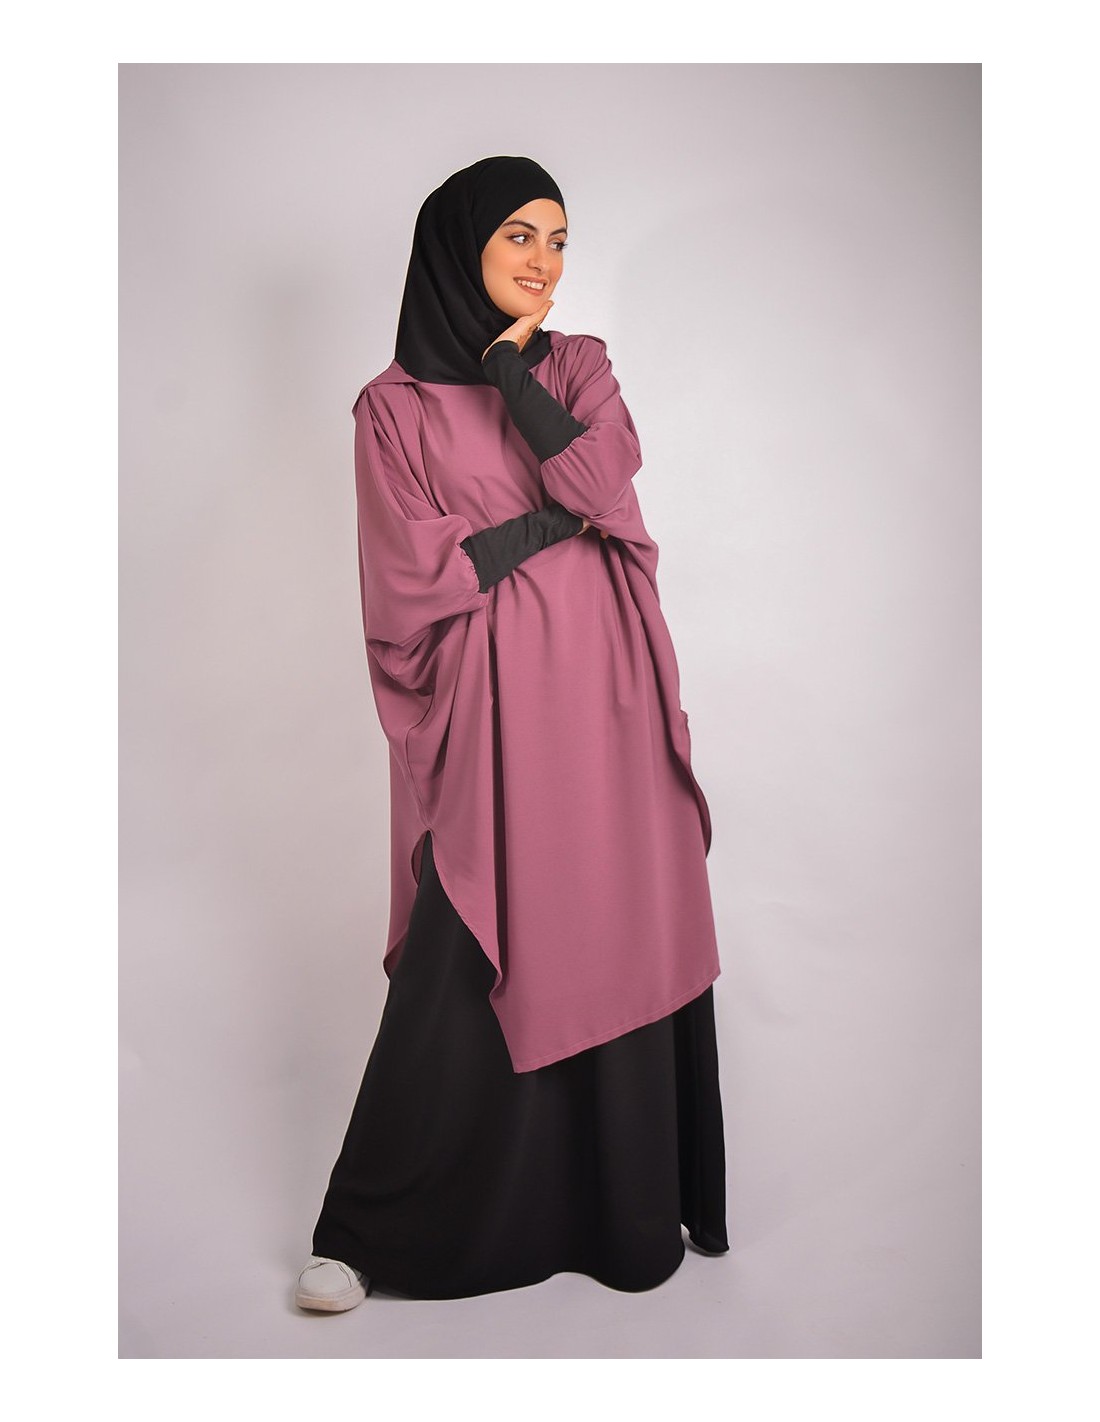 Young tunic: hijab and built-in hood